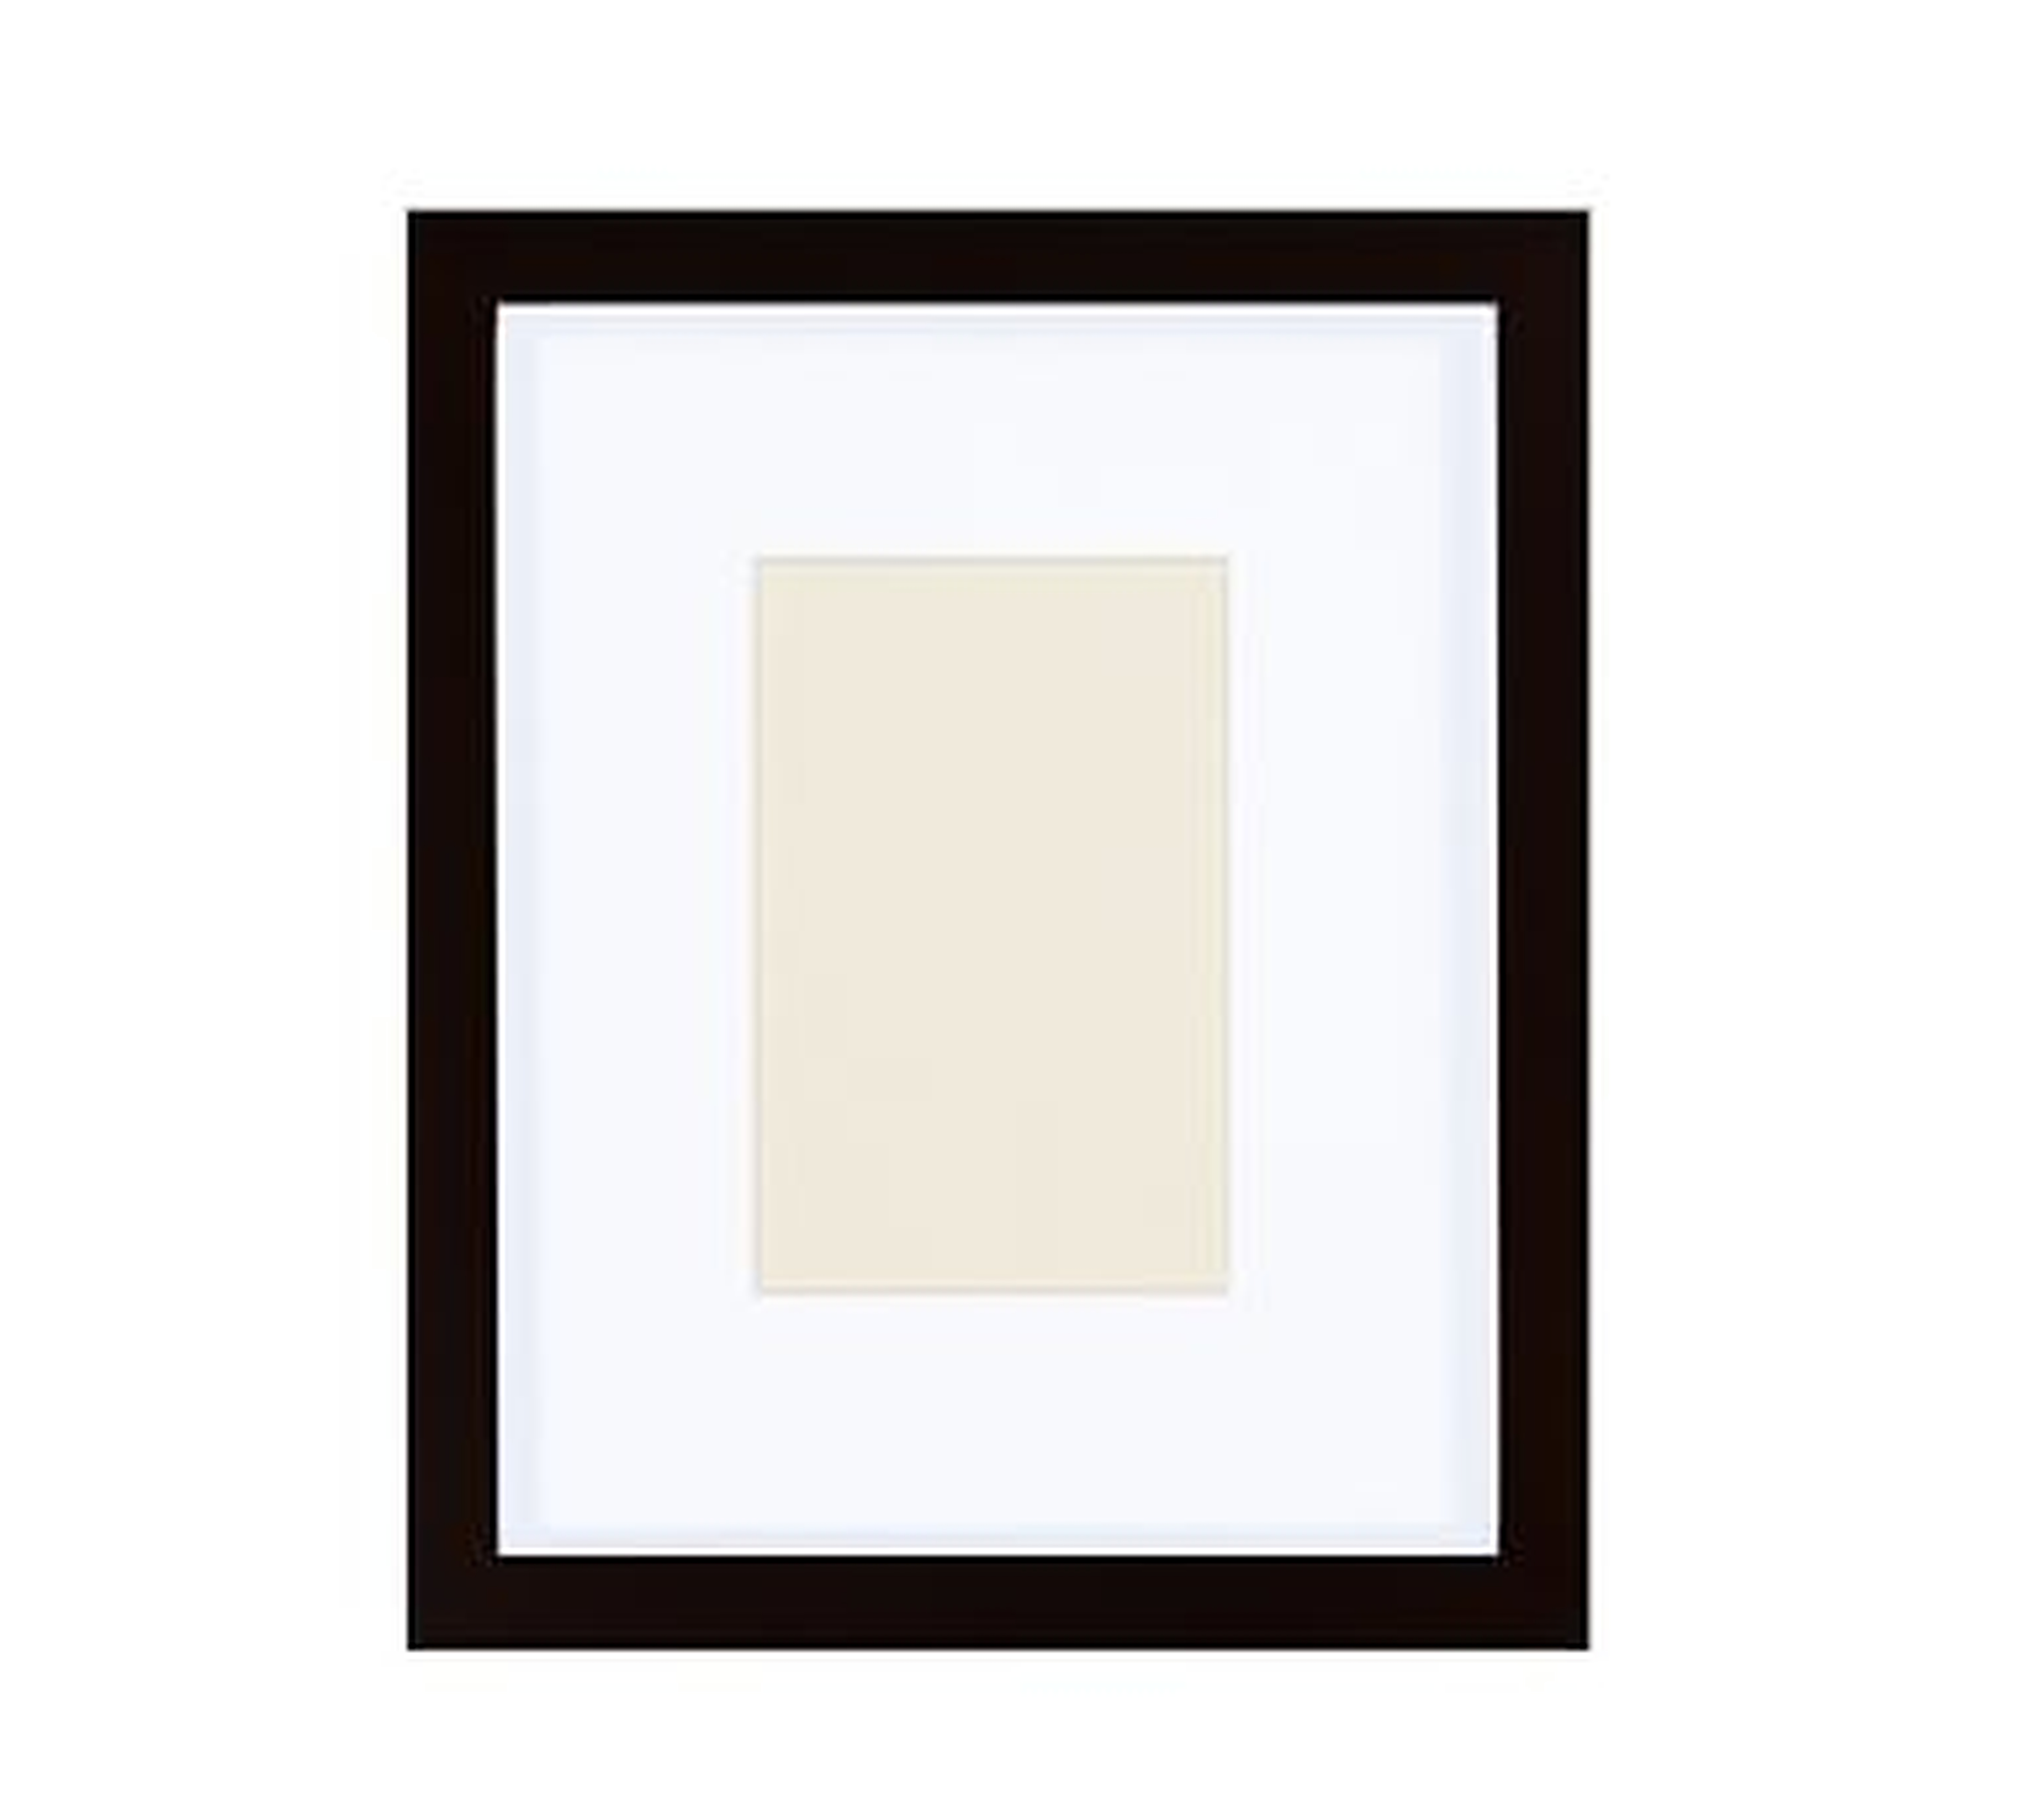 Wood Gallery Single Opening Frame - 4x6 (9x11" without mat) - Natural - Pottery Barn